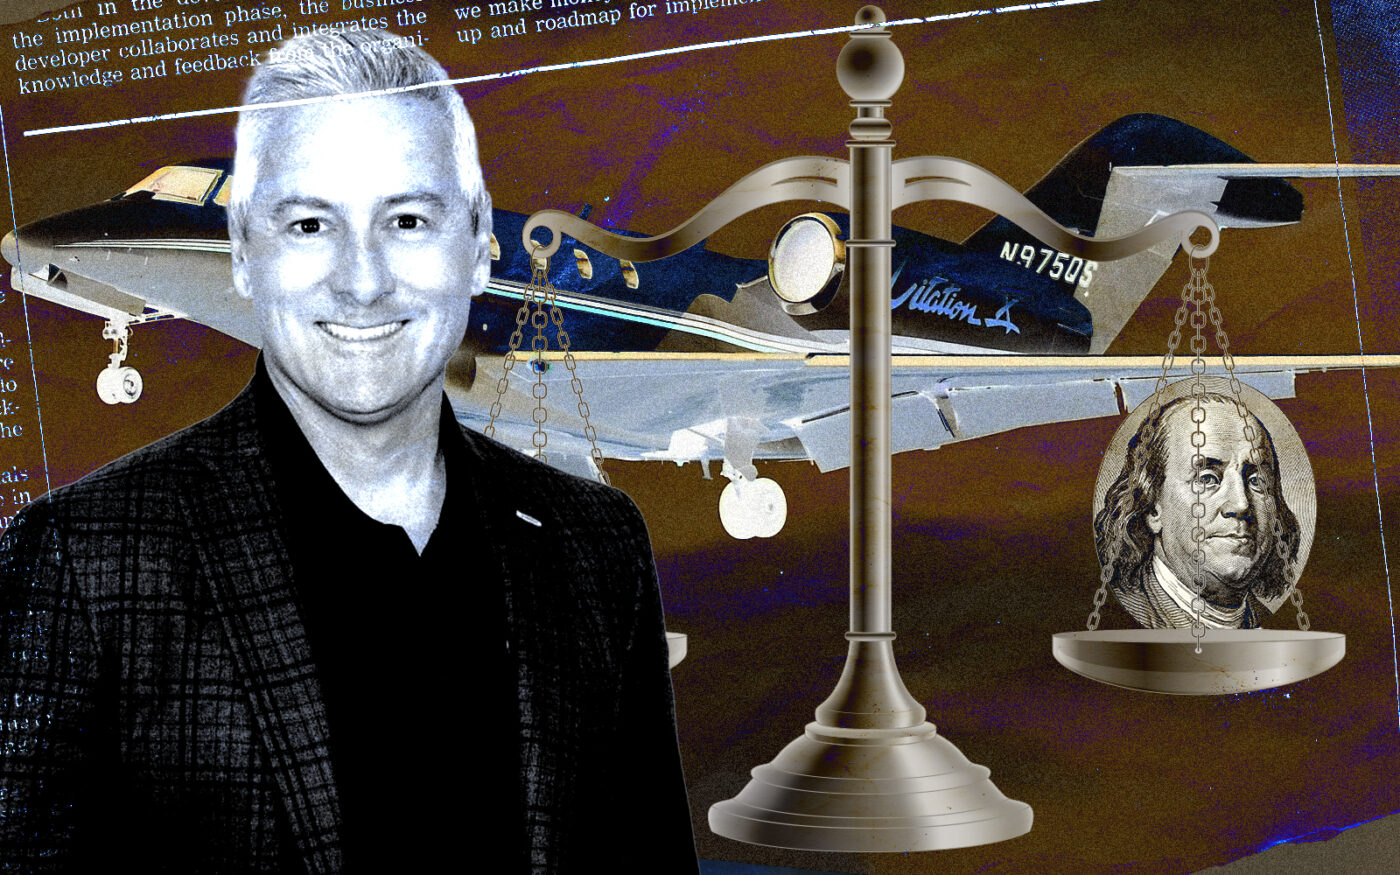 Syndicator GVA’s Alan Stalcup Sued Over Private Jet Buy